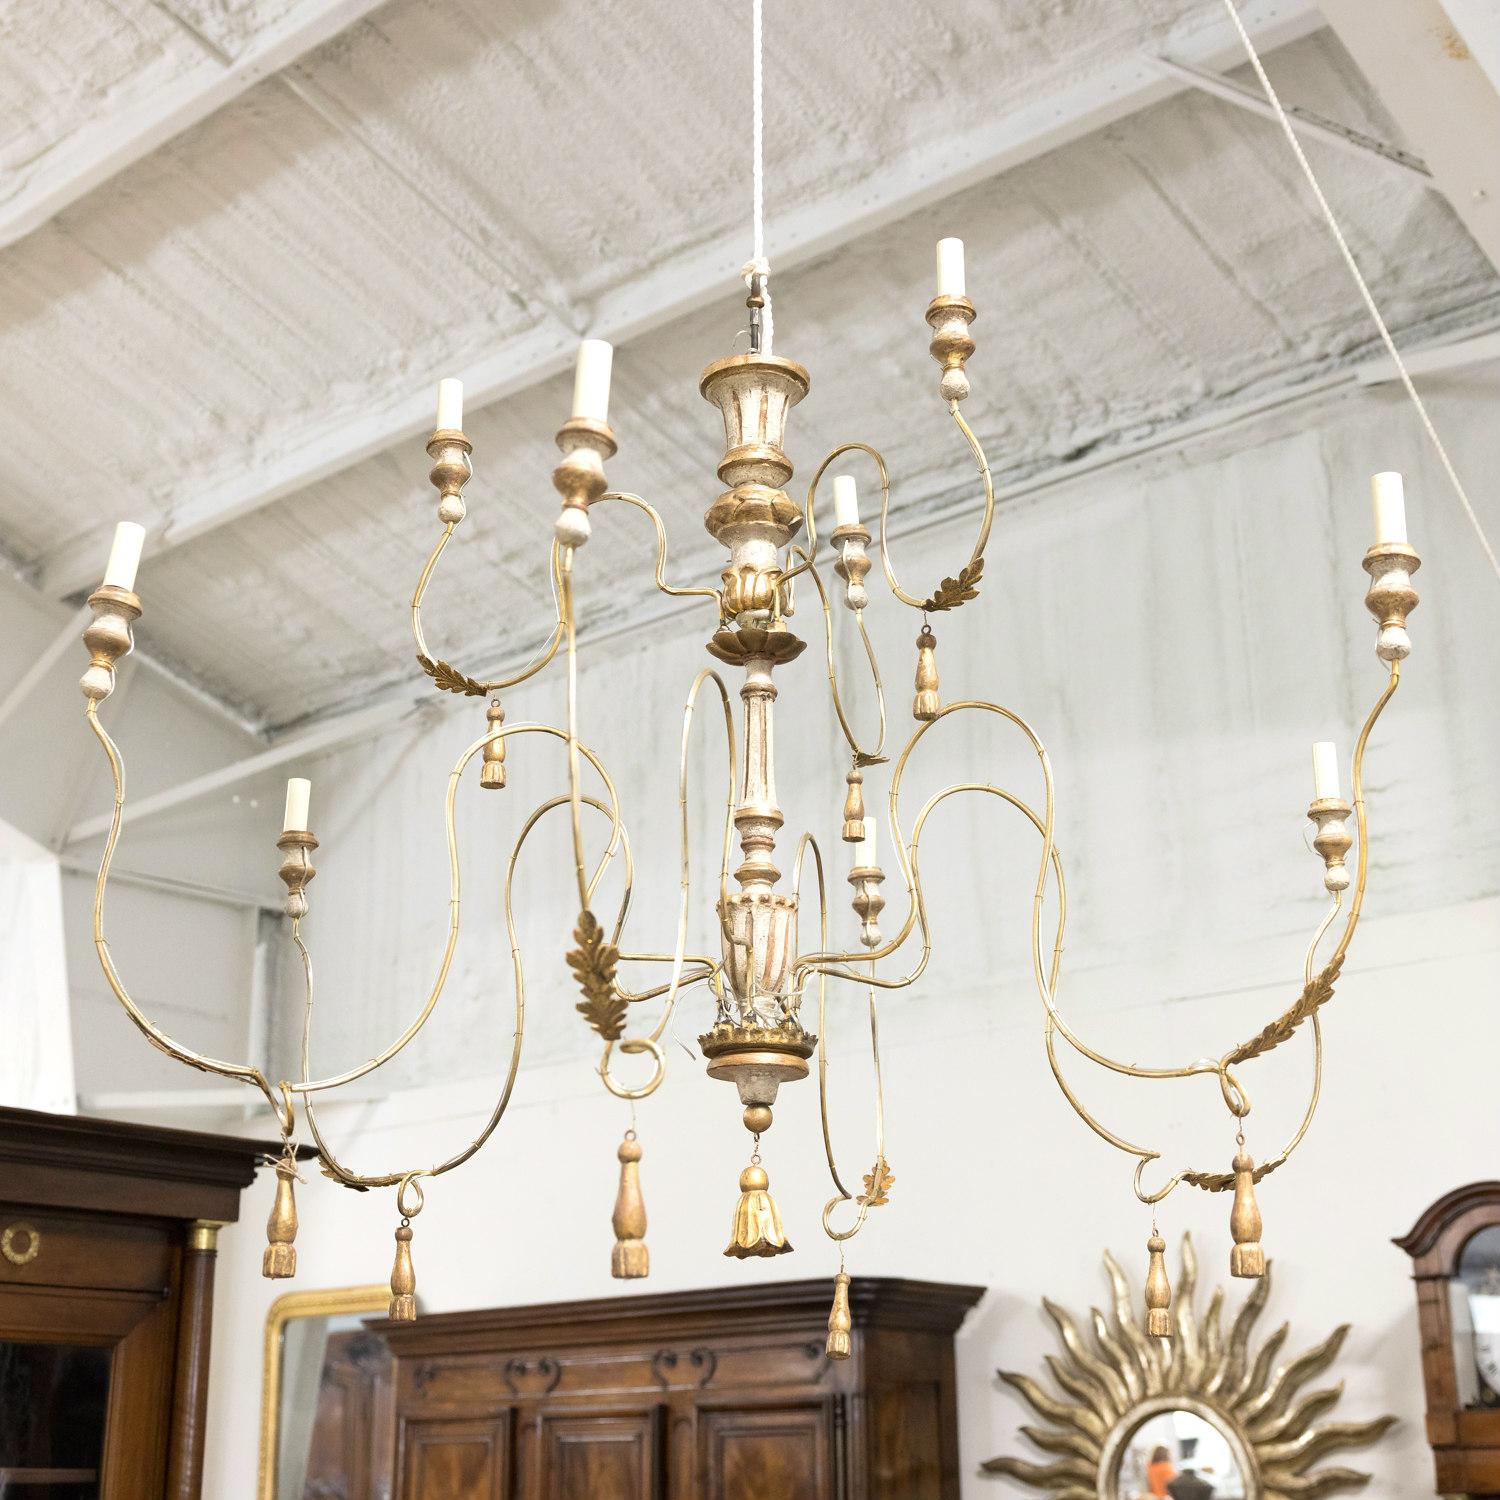 A painted and parcel gilt French chandelier hand made in France from 18th century parts having two tiers and nine lights. This beautiful chandelier features a central turned and fluted wooden column adorned with giltwood foliate and beaded elements.